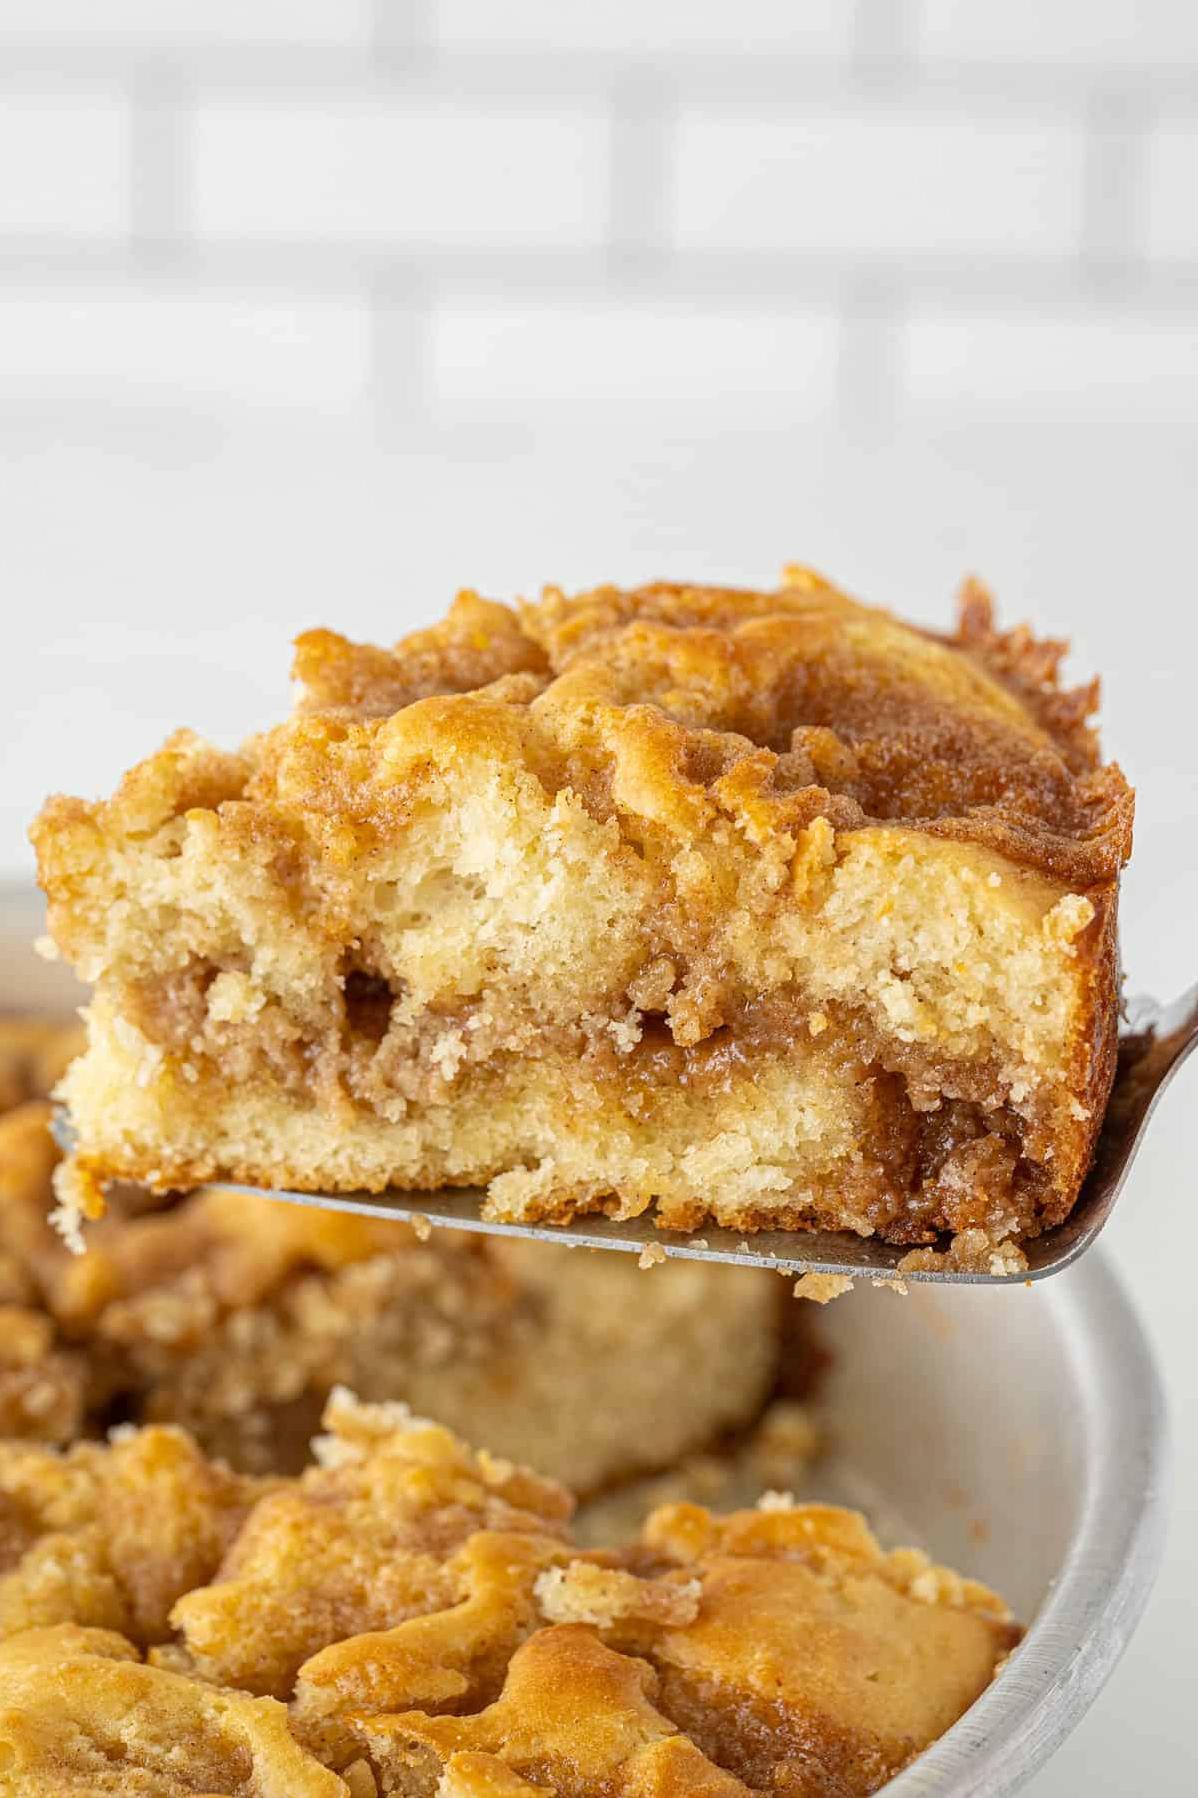  This coffee cake is the perfect dish to serve for brunch or afternoon tea with friends.